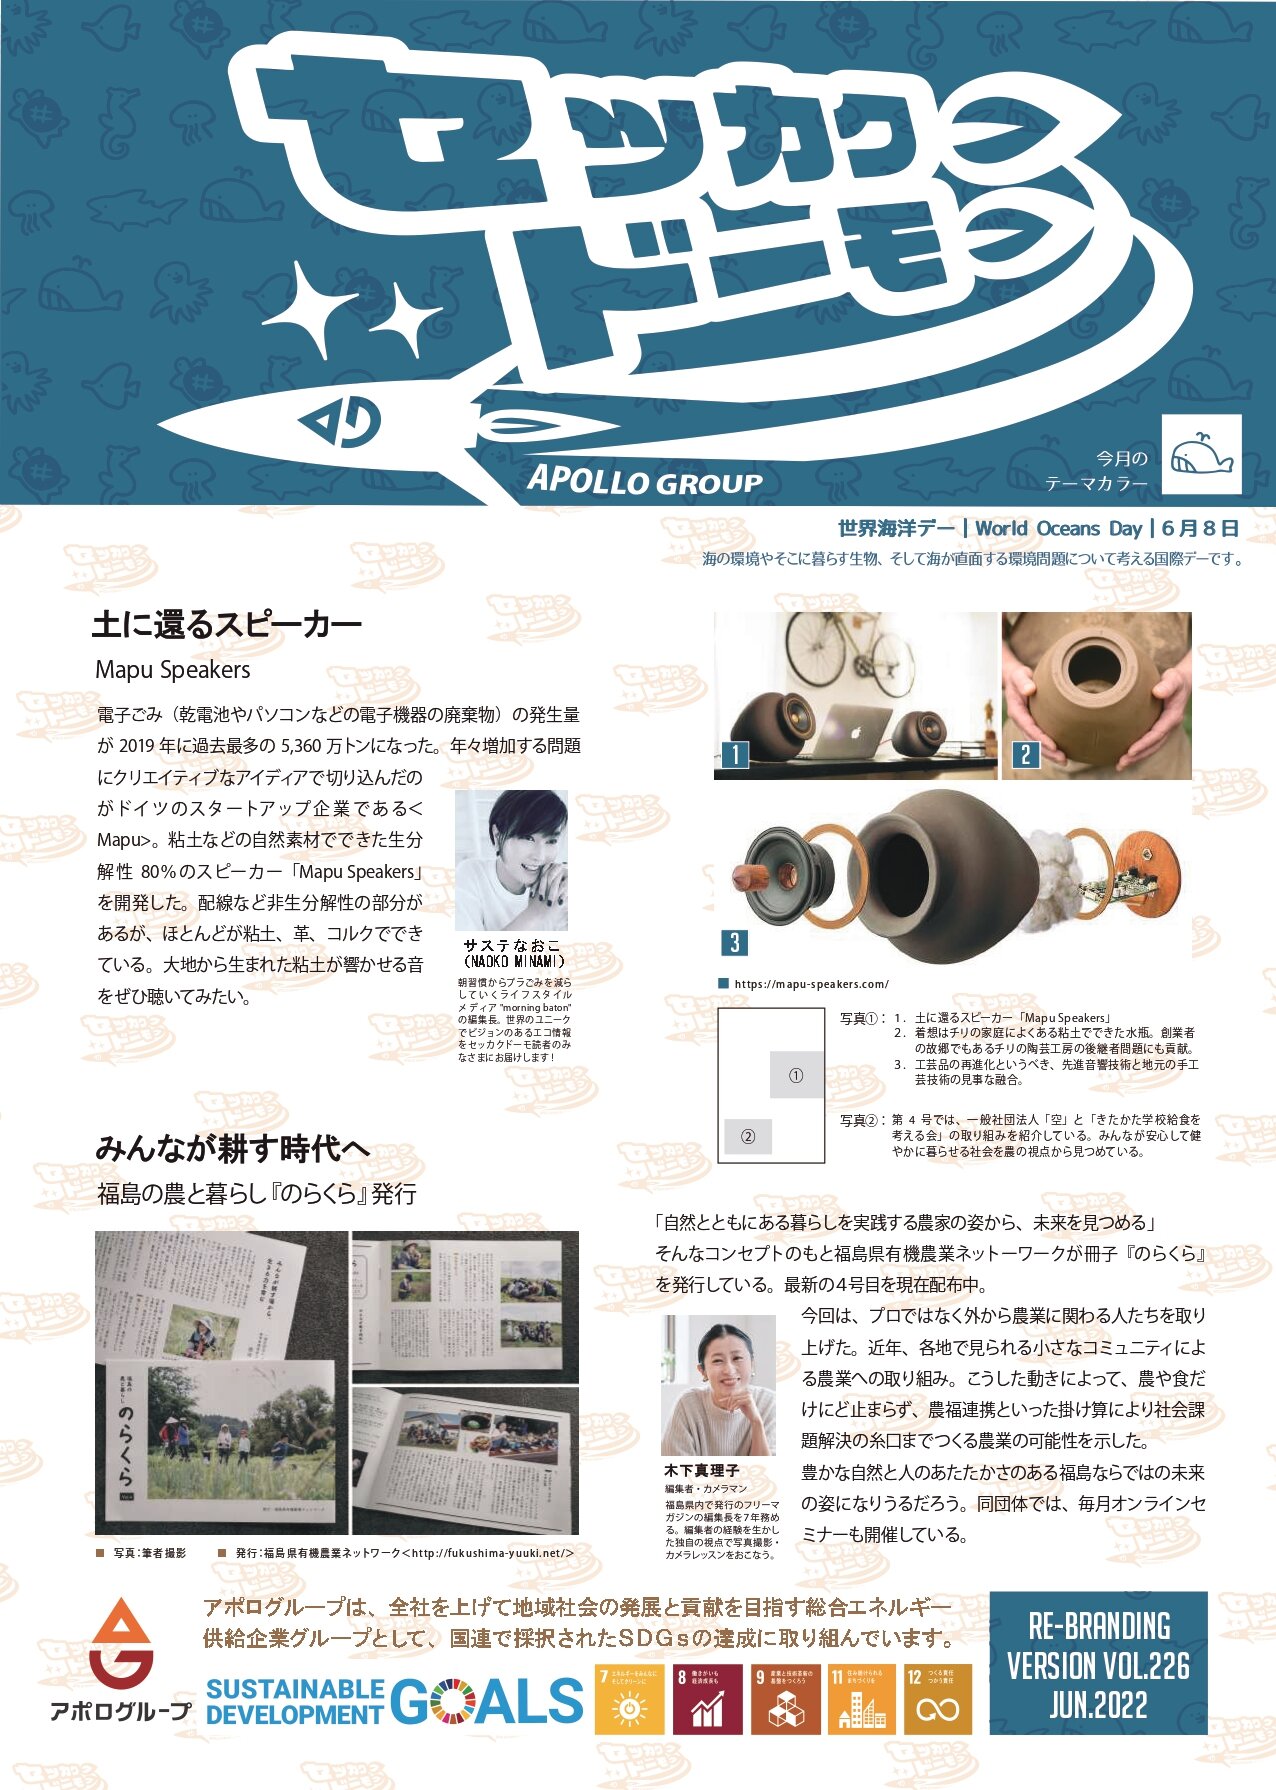 https://www.apollogas.co.jp/news/images/SD226_compressed%20%281%29_page-0001.jpg